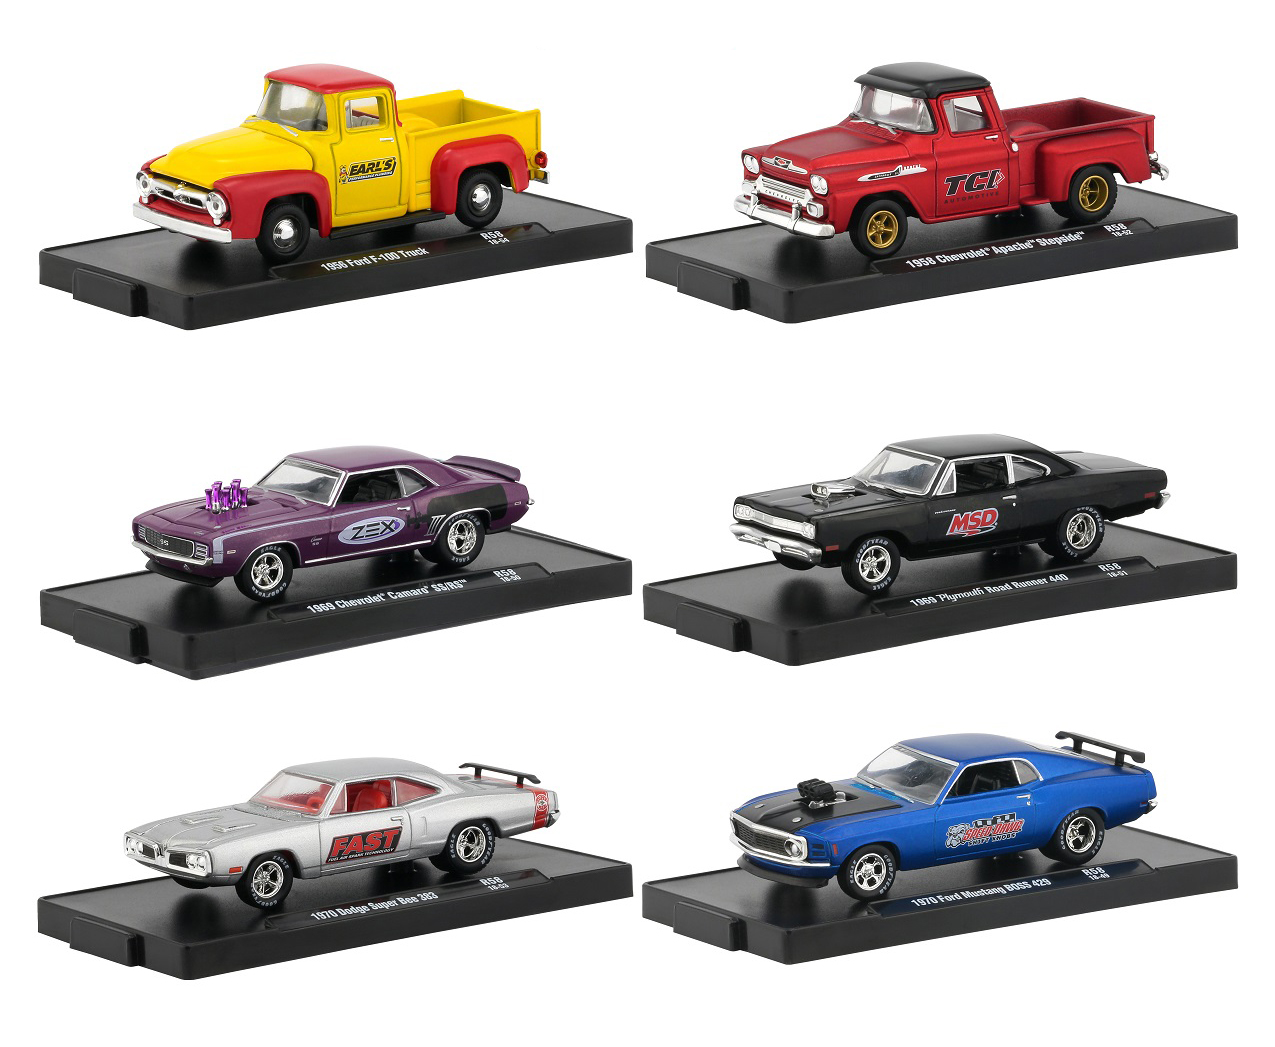 Drivers 6 Cars Set Release 58 In Blister Packs 1/64 Diecast Model Cars By M2 Machines